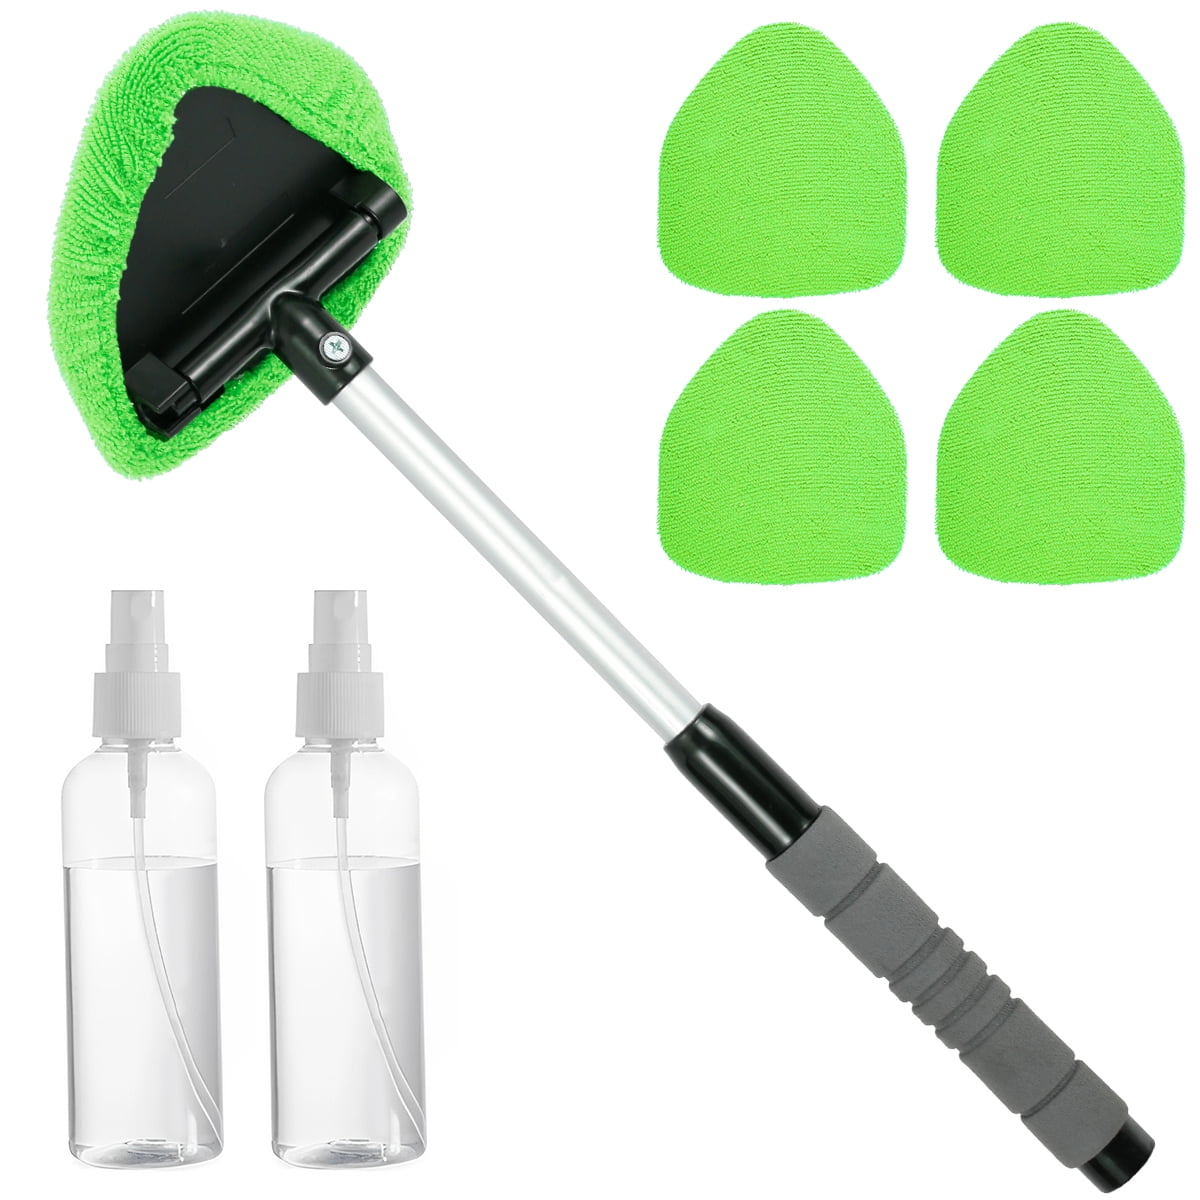 KwoKmarK Windshield Cleaner Tool Car Window Cleaning Wand Glass Microfiber Brush Bigger Pad Thicker Softy Cloth with Towel Spray Bottle Cloth Bag Kit